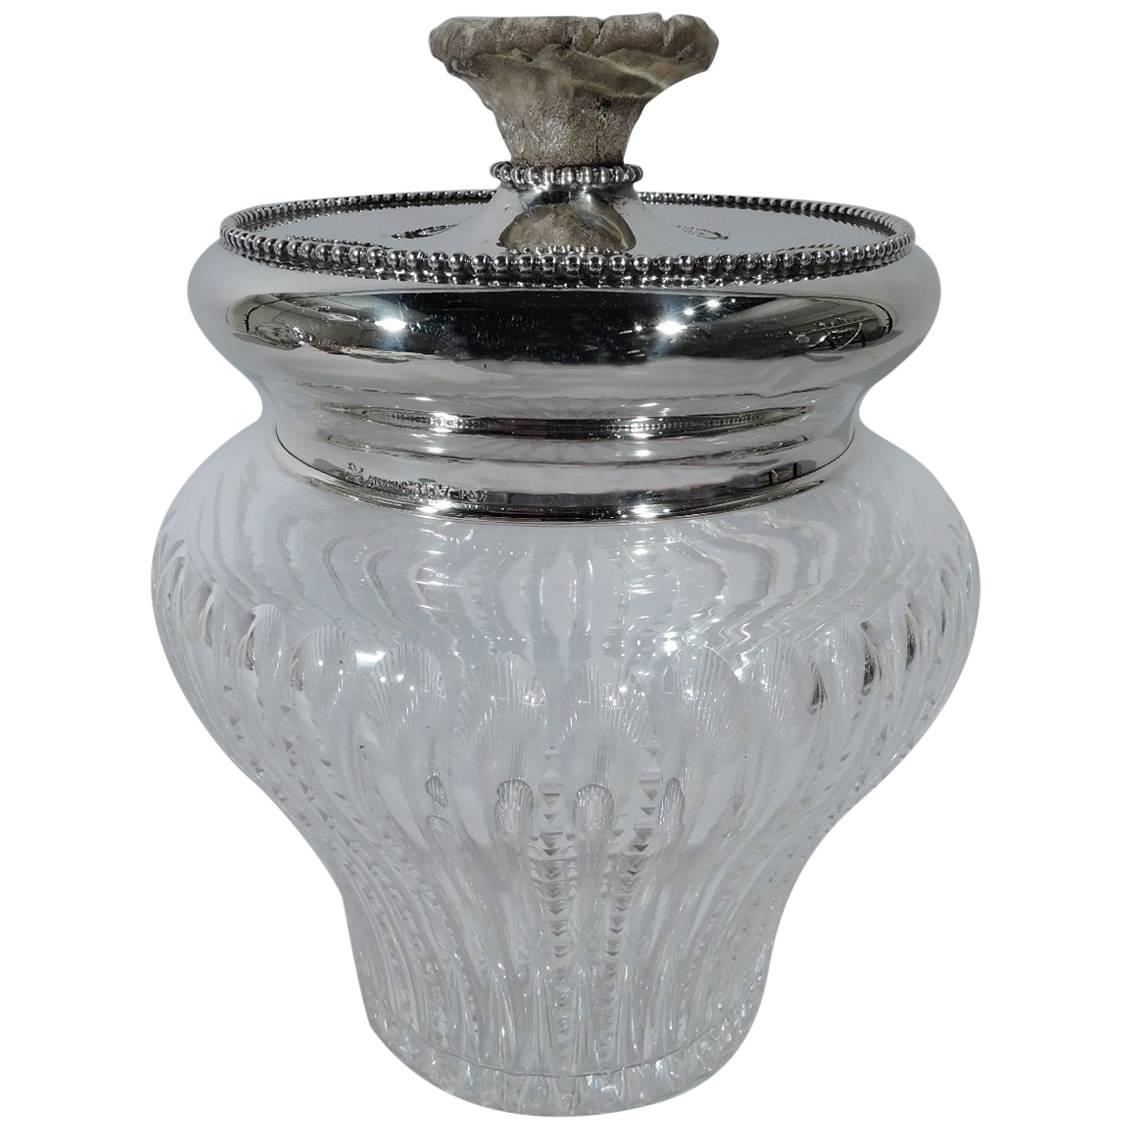 Antique Cut-Glass and Sterling Silver Tobacco Jar with Antler Finial